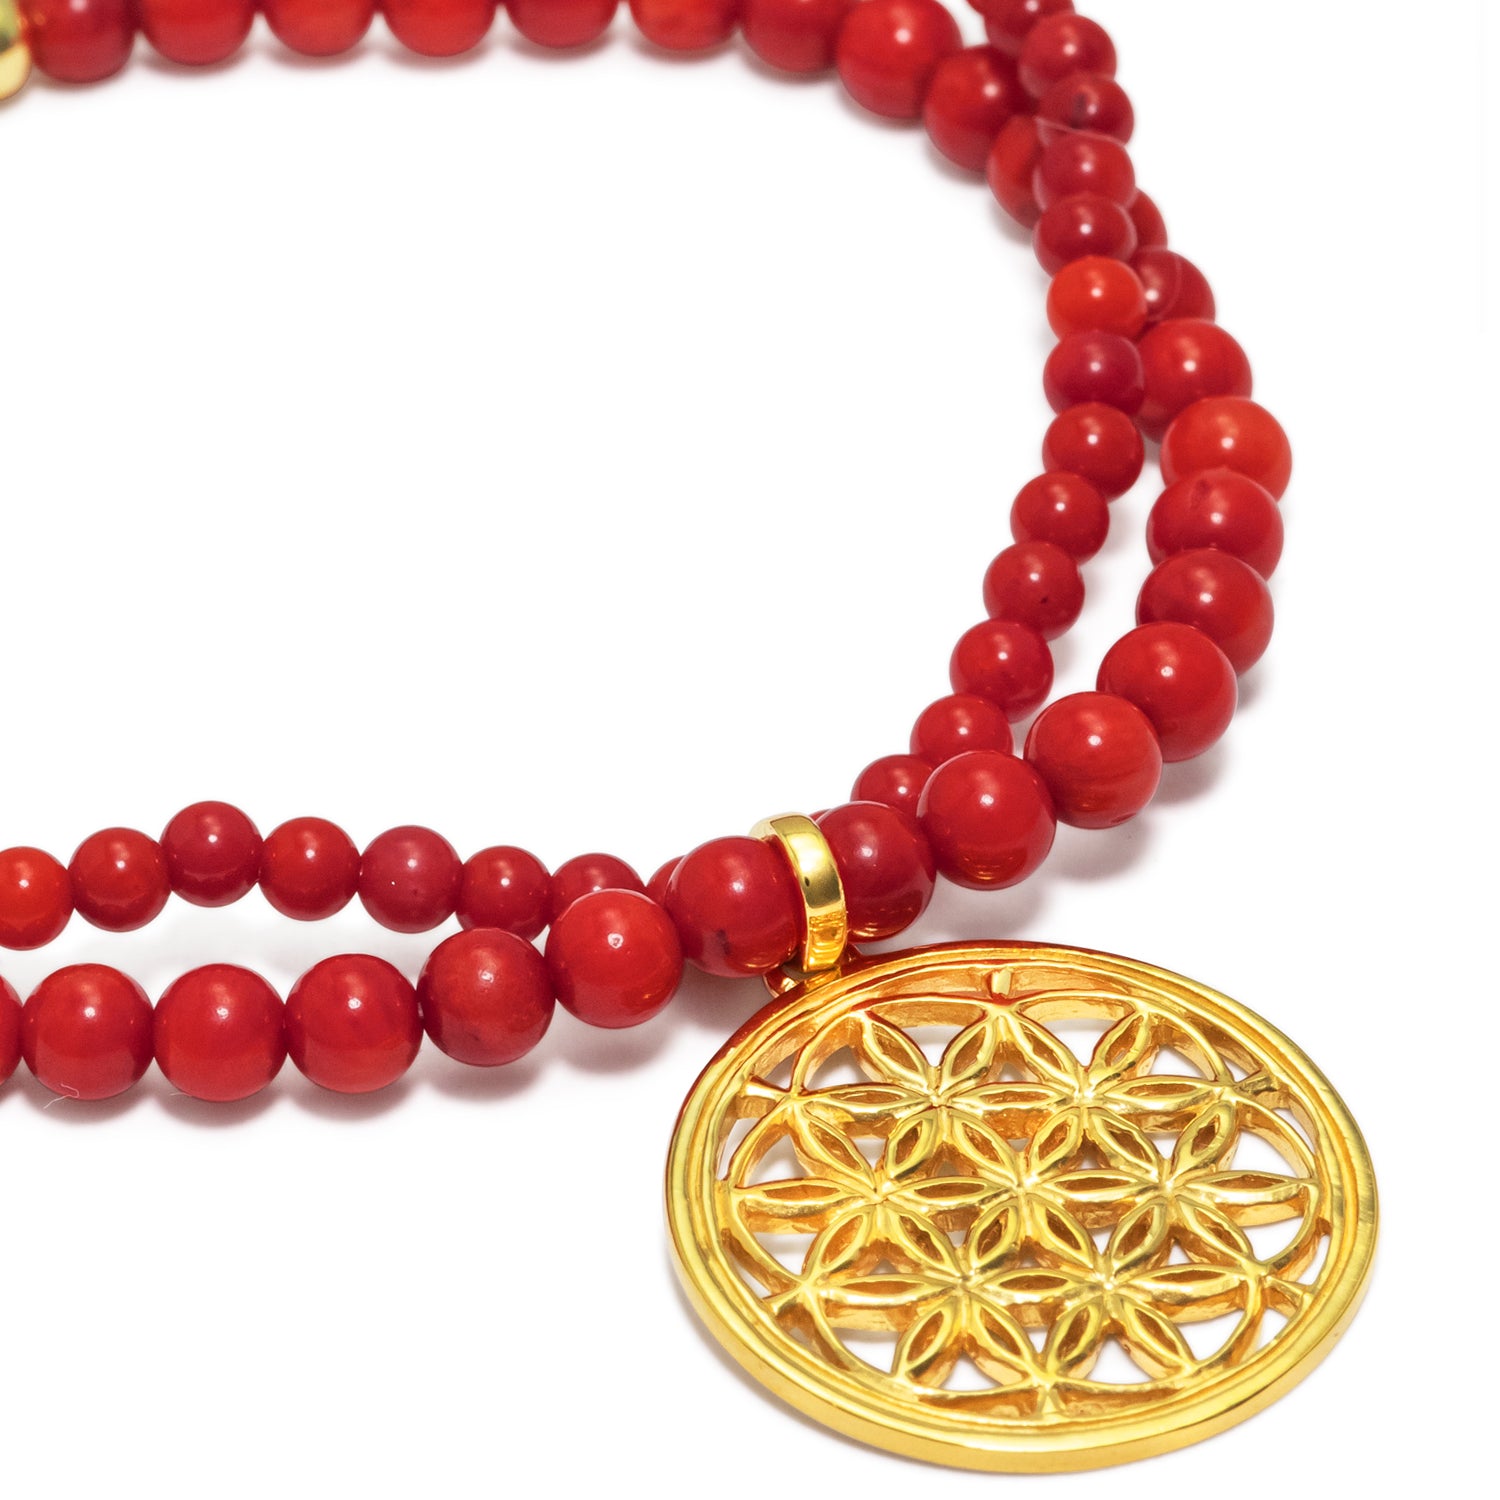 Coral bracelet with flower of life amulet made of gold-plated sterling silver